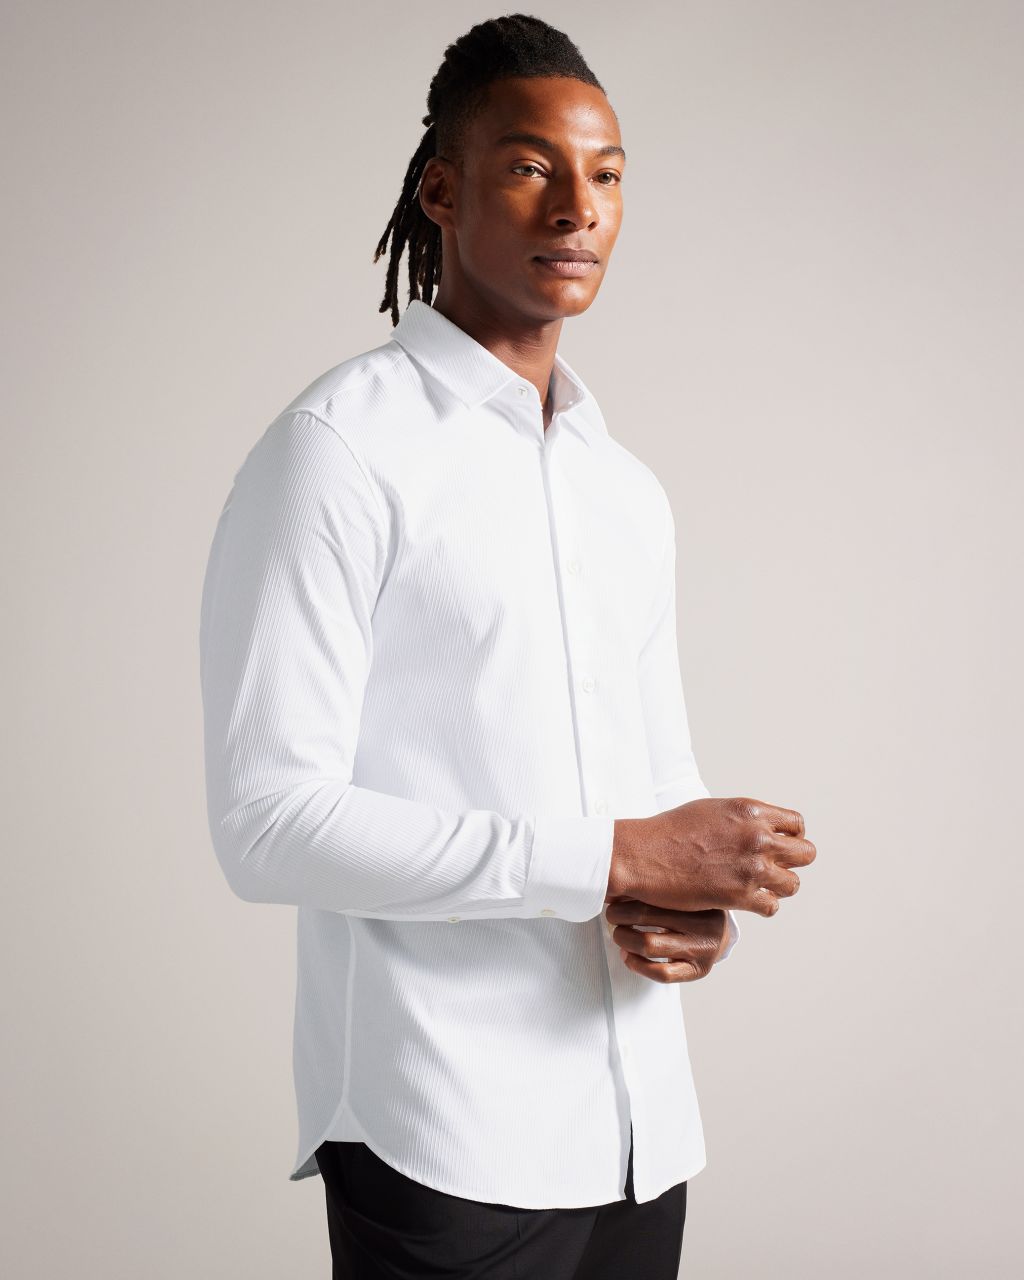 Men's Long Sleeve Textured Stripe Shirt in White, Lecce